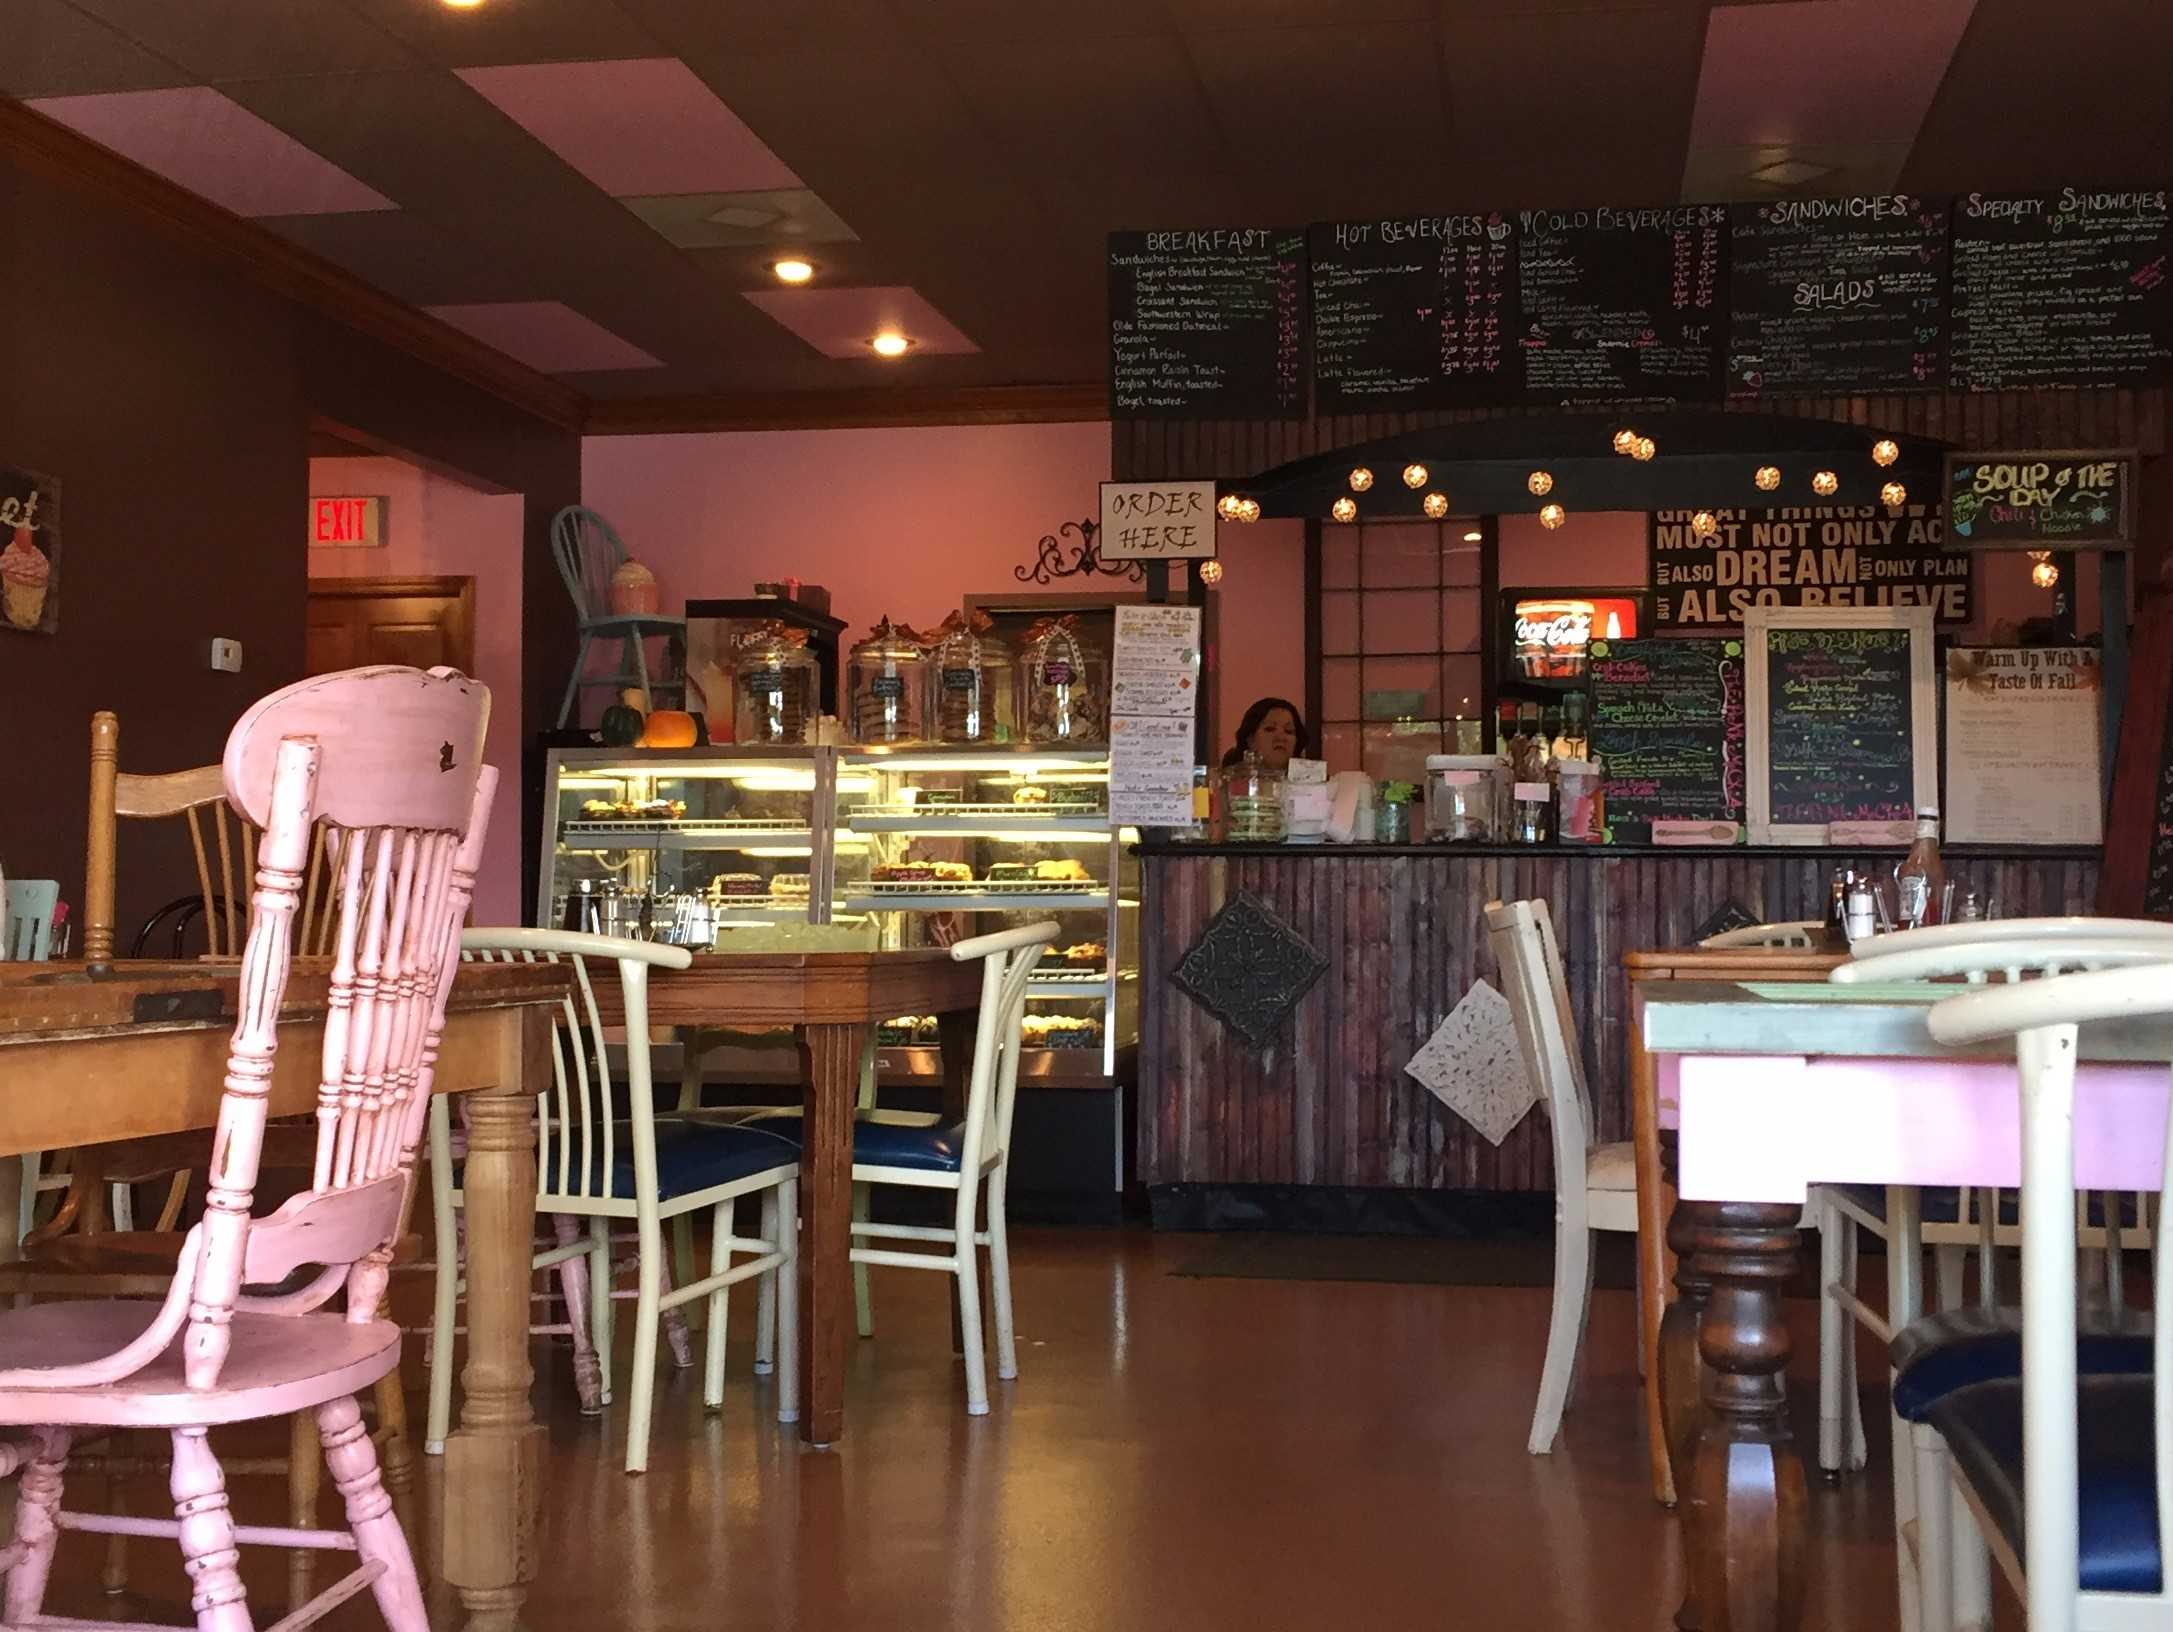 New Changes Ahead for The Pink Mocha Cafe The Arrowhead